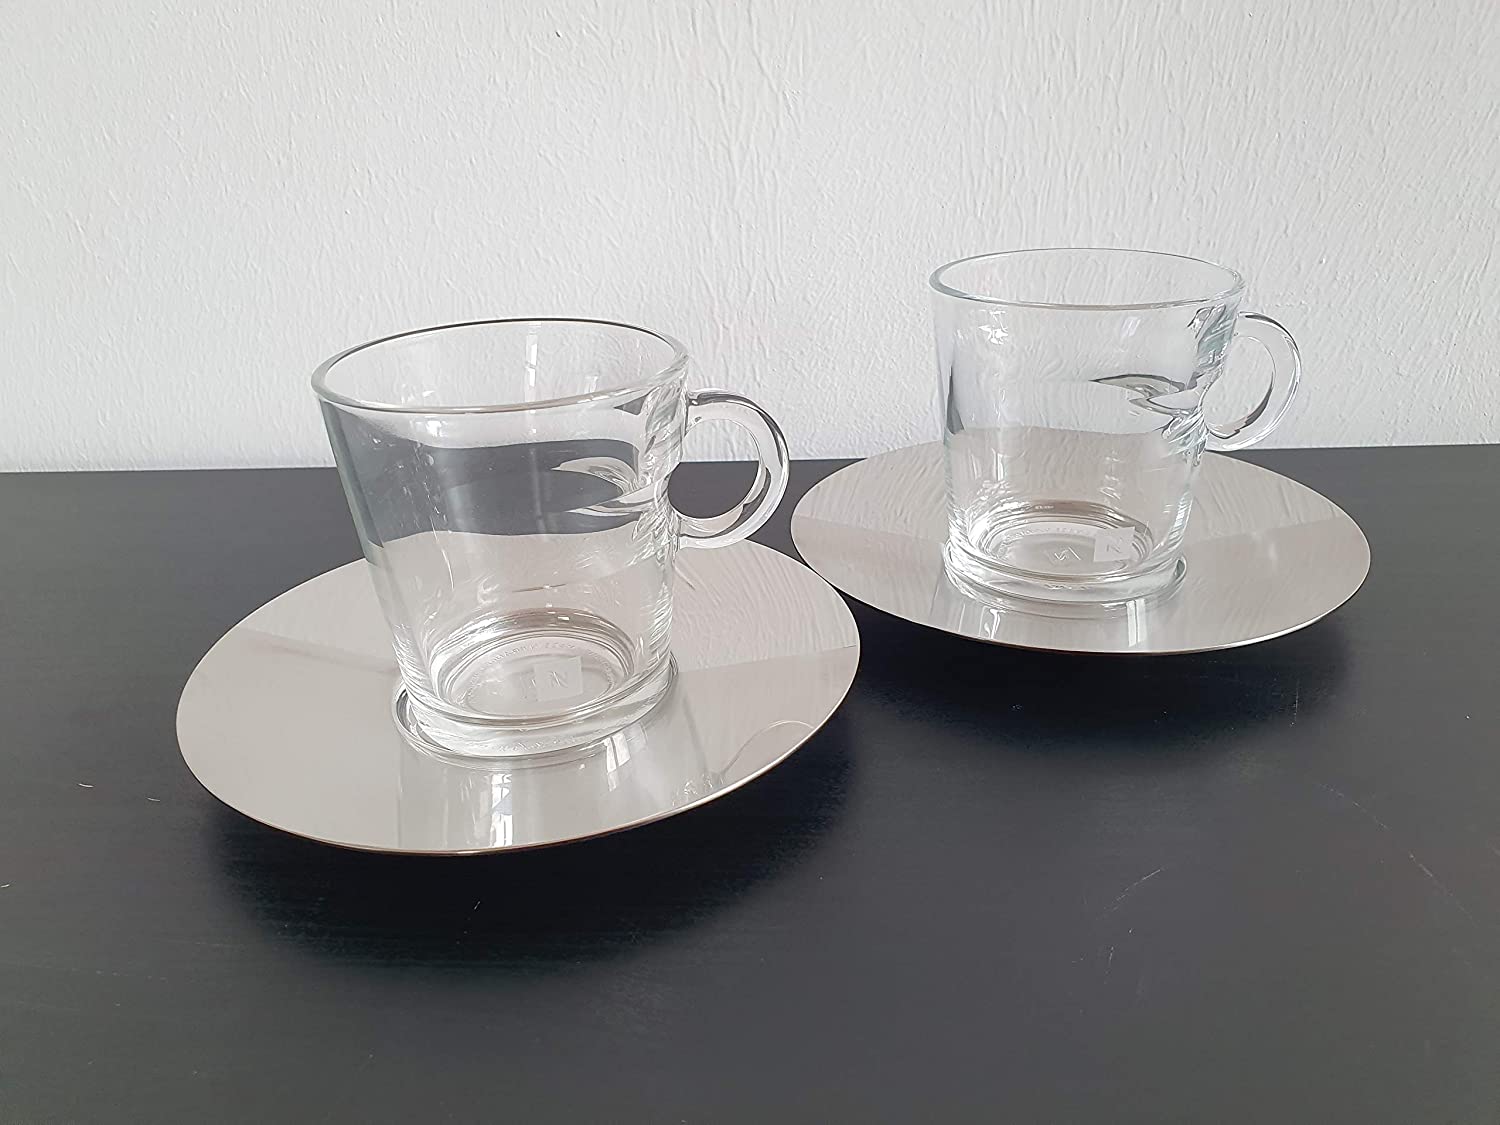 Nespresso Set of 2 Lungo Cups from the VIEW Series Coffee Tea Cocoa Cups Glass